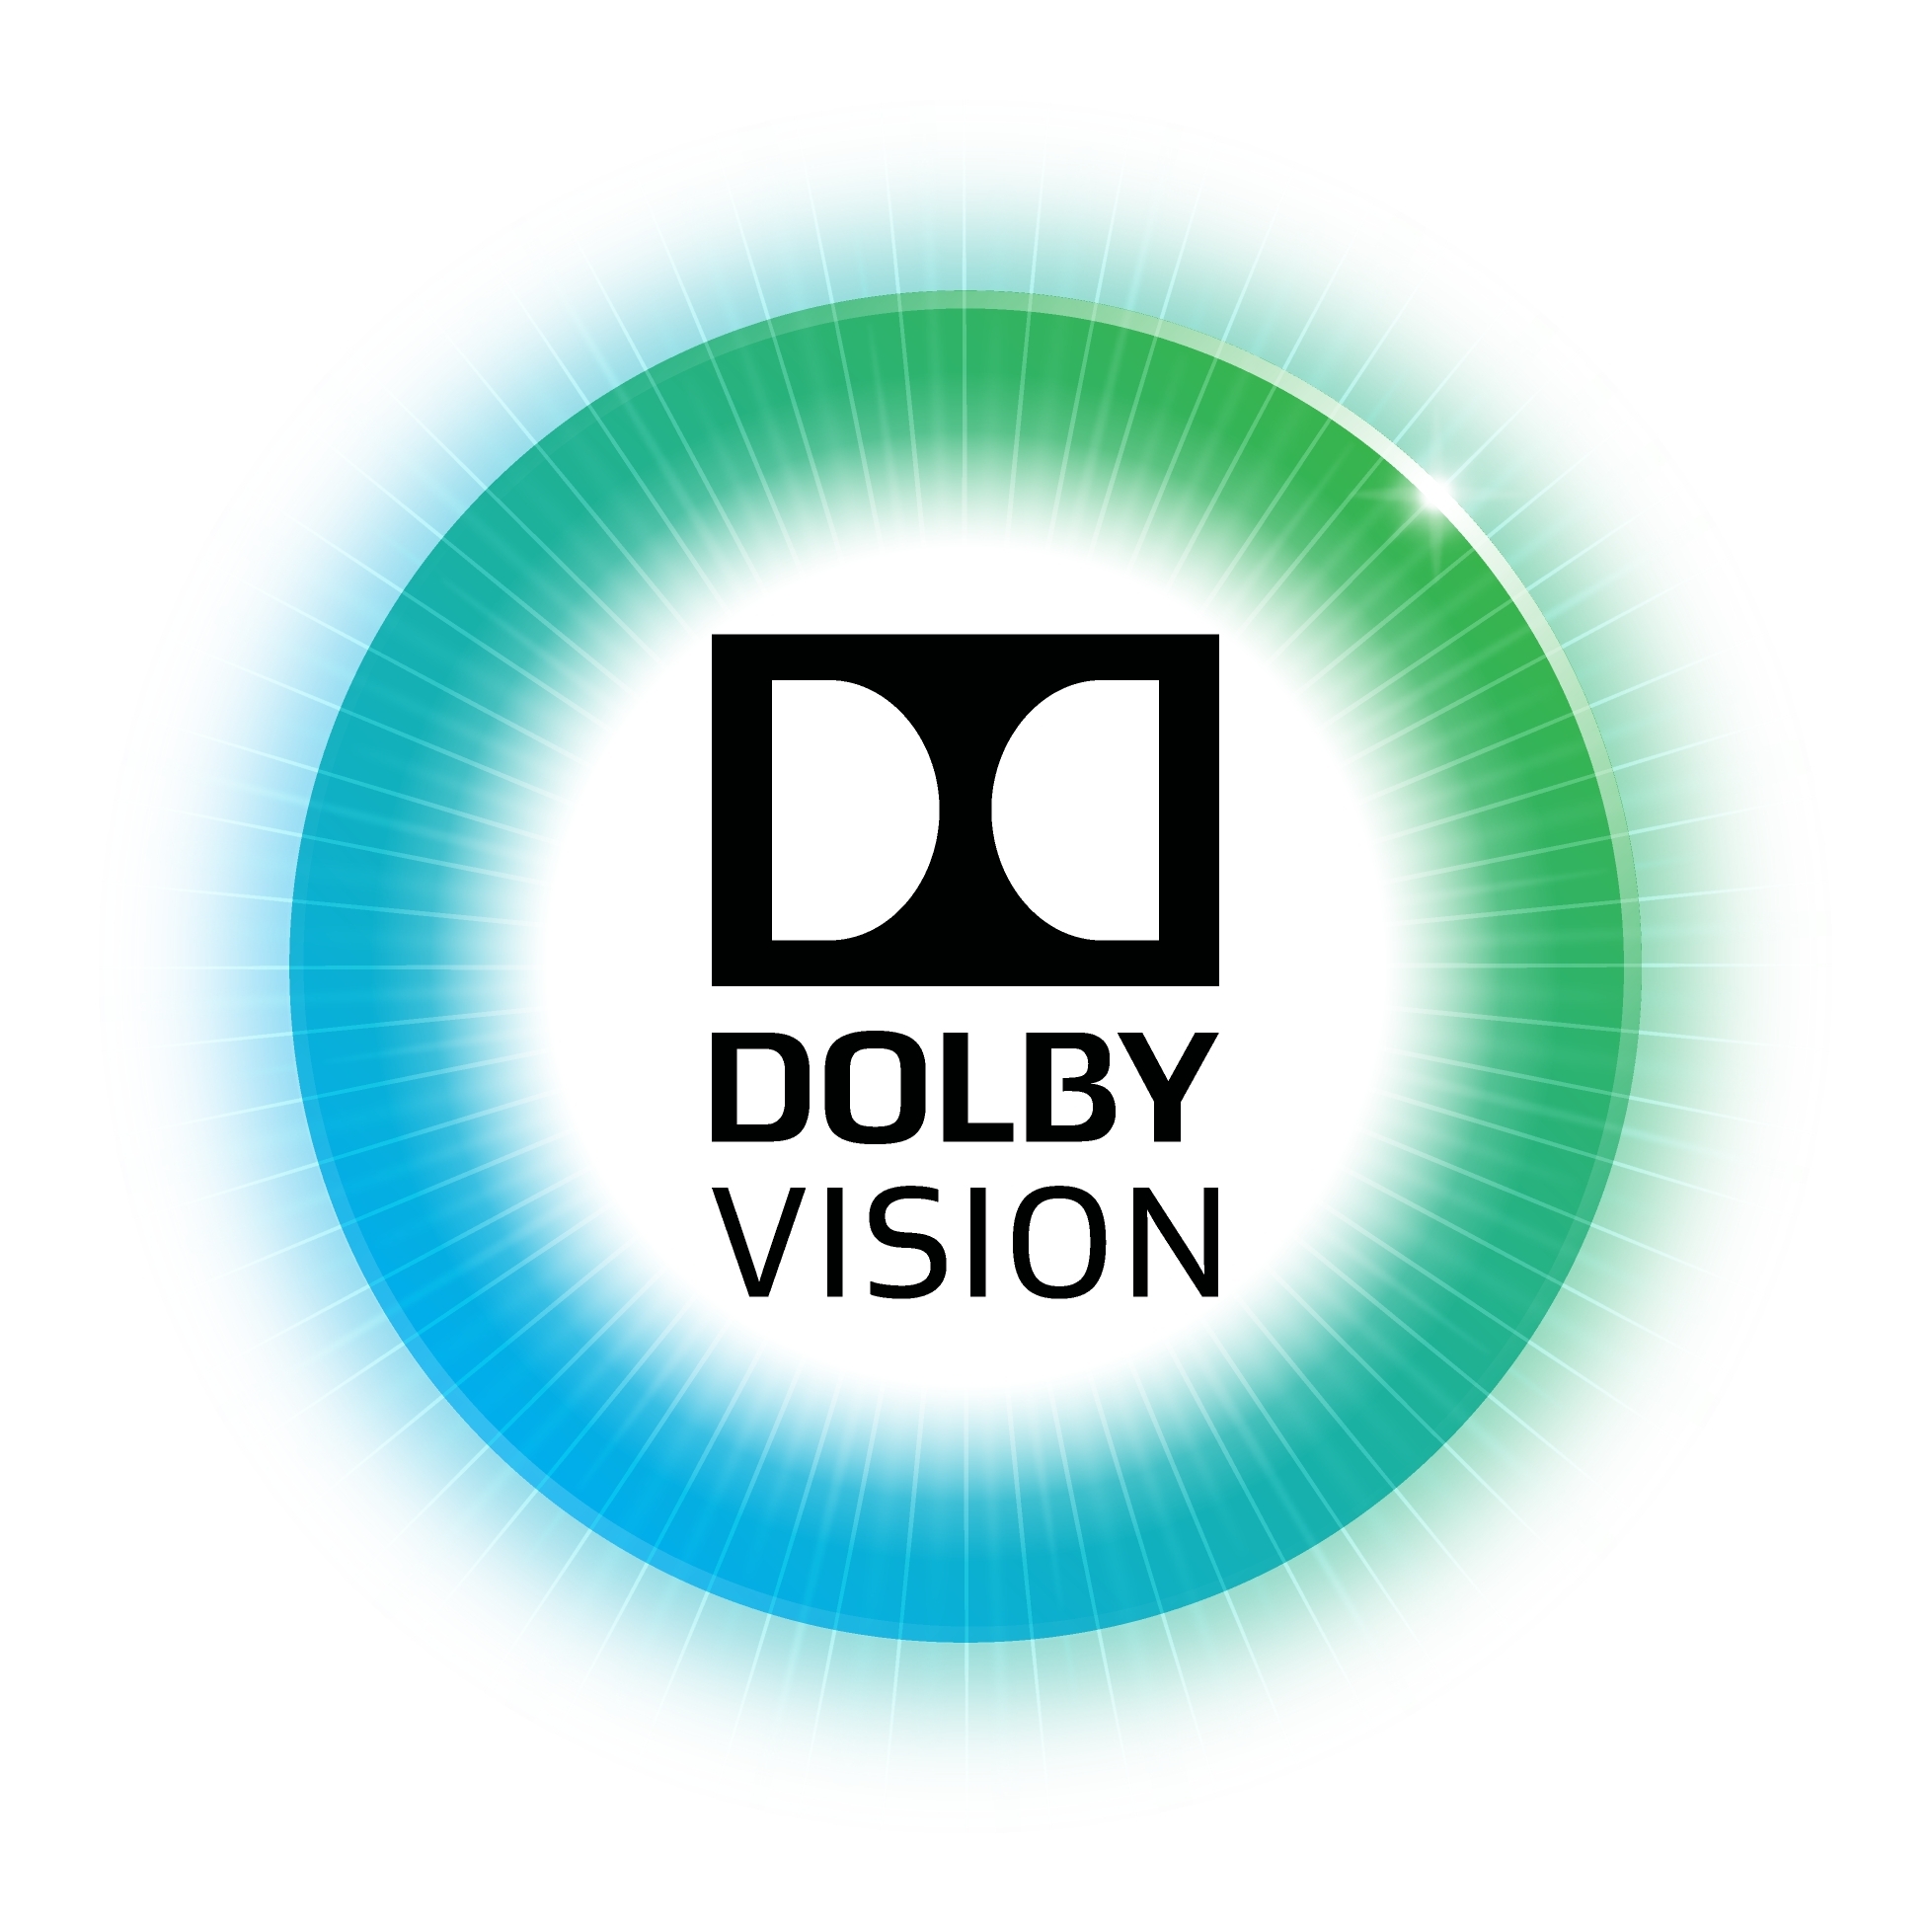 Dolby Laboratories and Lionsgate Announce Collaboration to Bring Dolby Vision and Dolby Atmos Content to the Home Business Wire